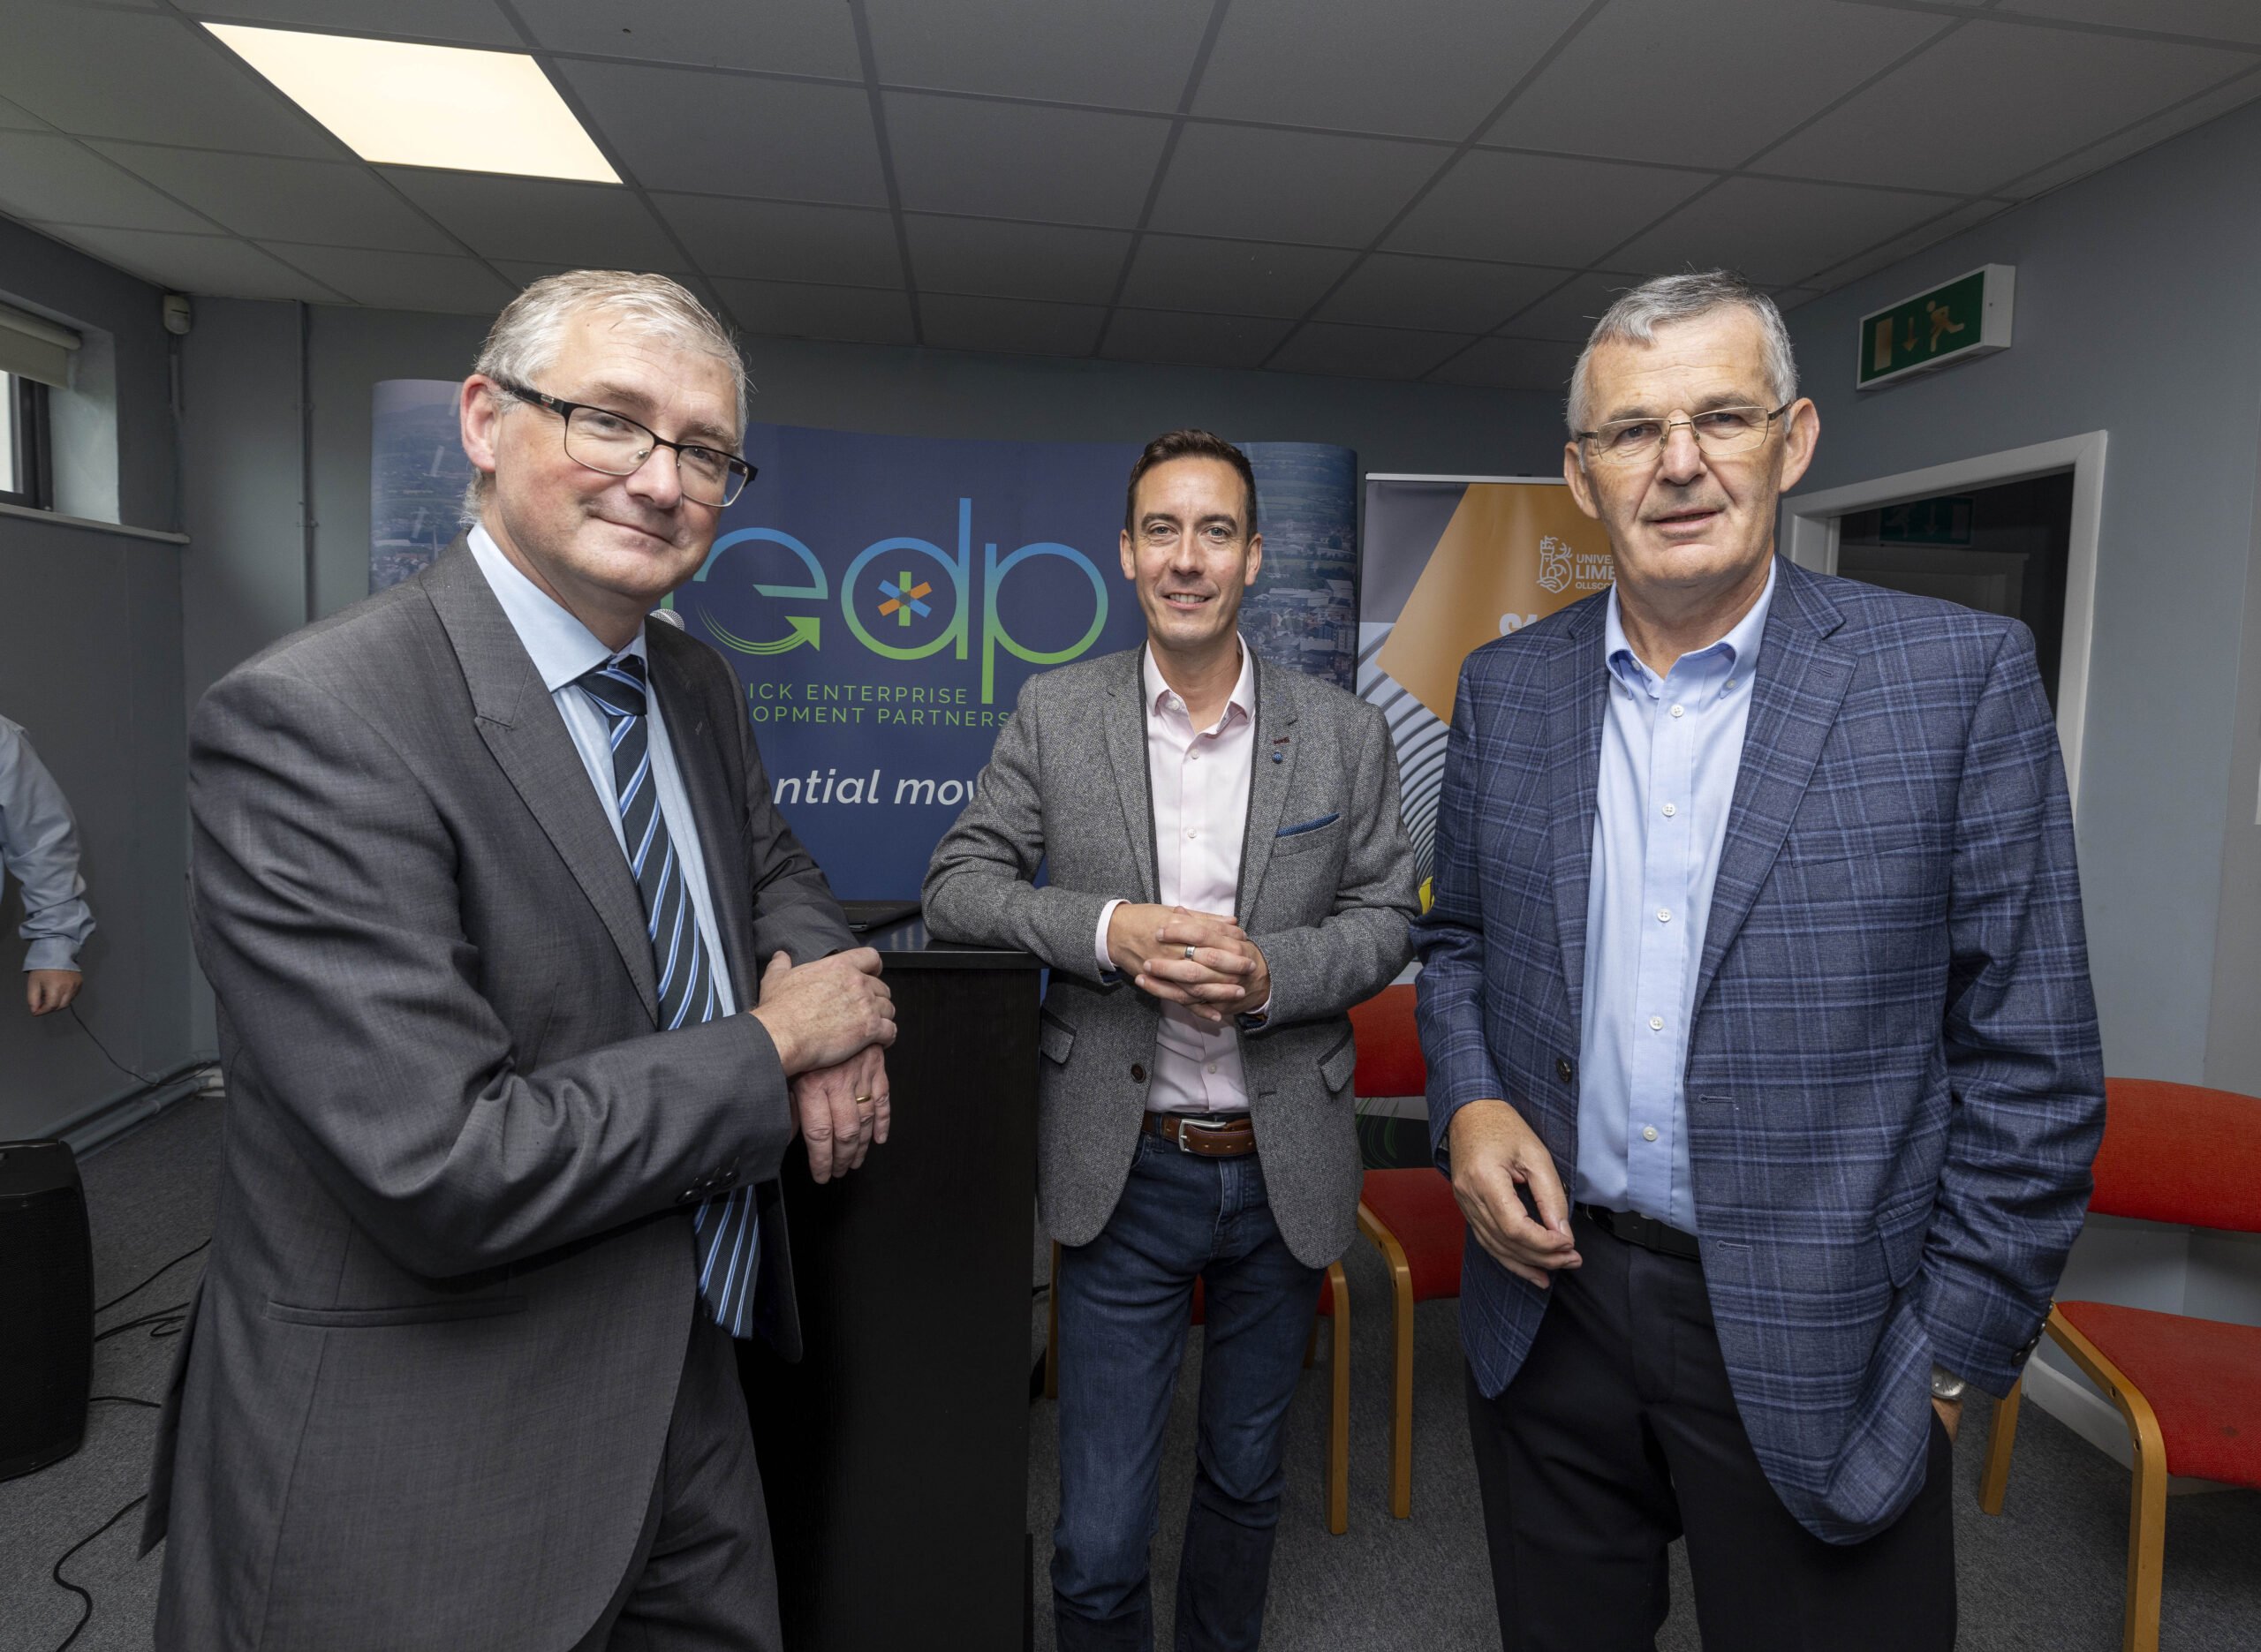 LEDP and UL celebrate 20 years of the UL AccessCampus Partnership at LEDP